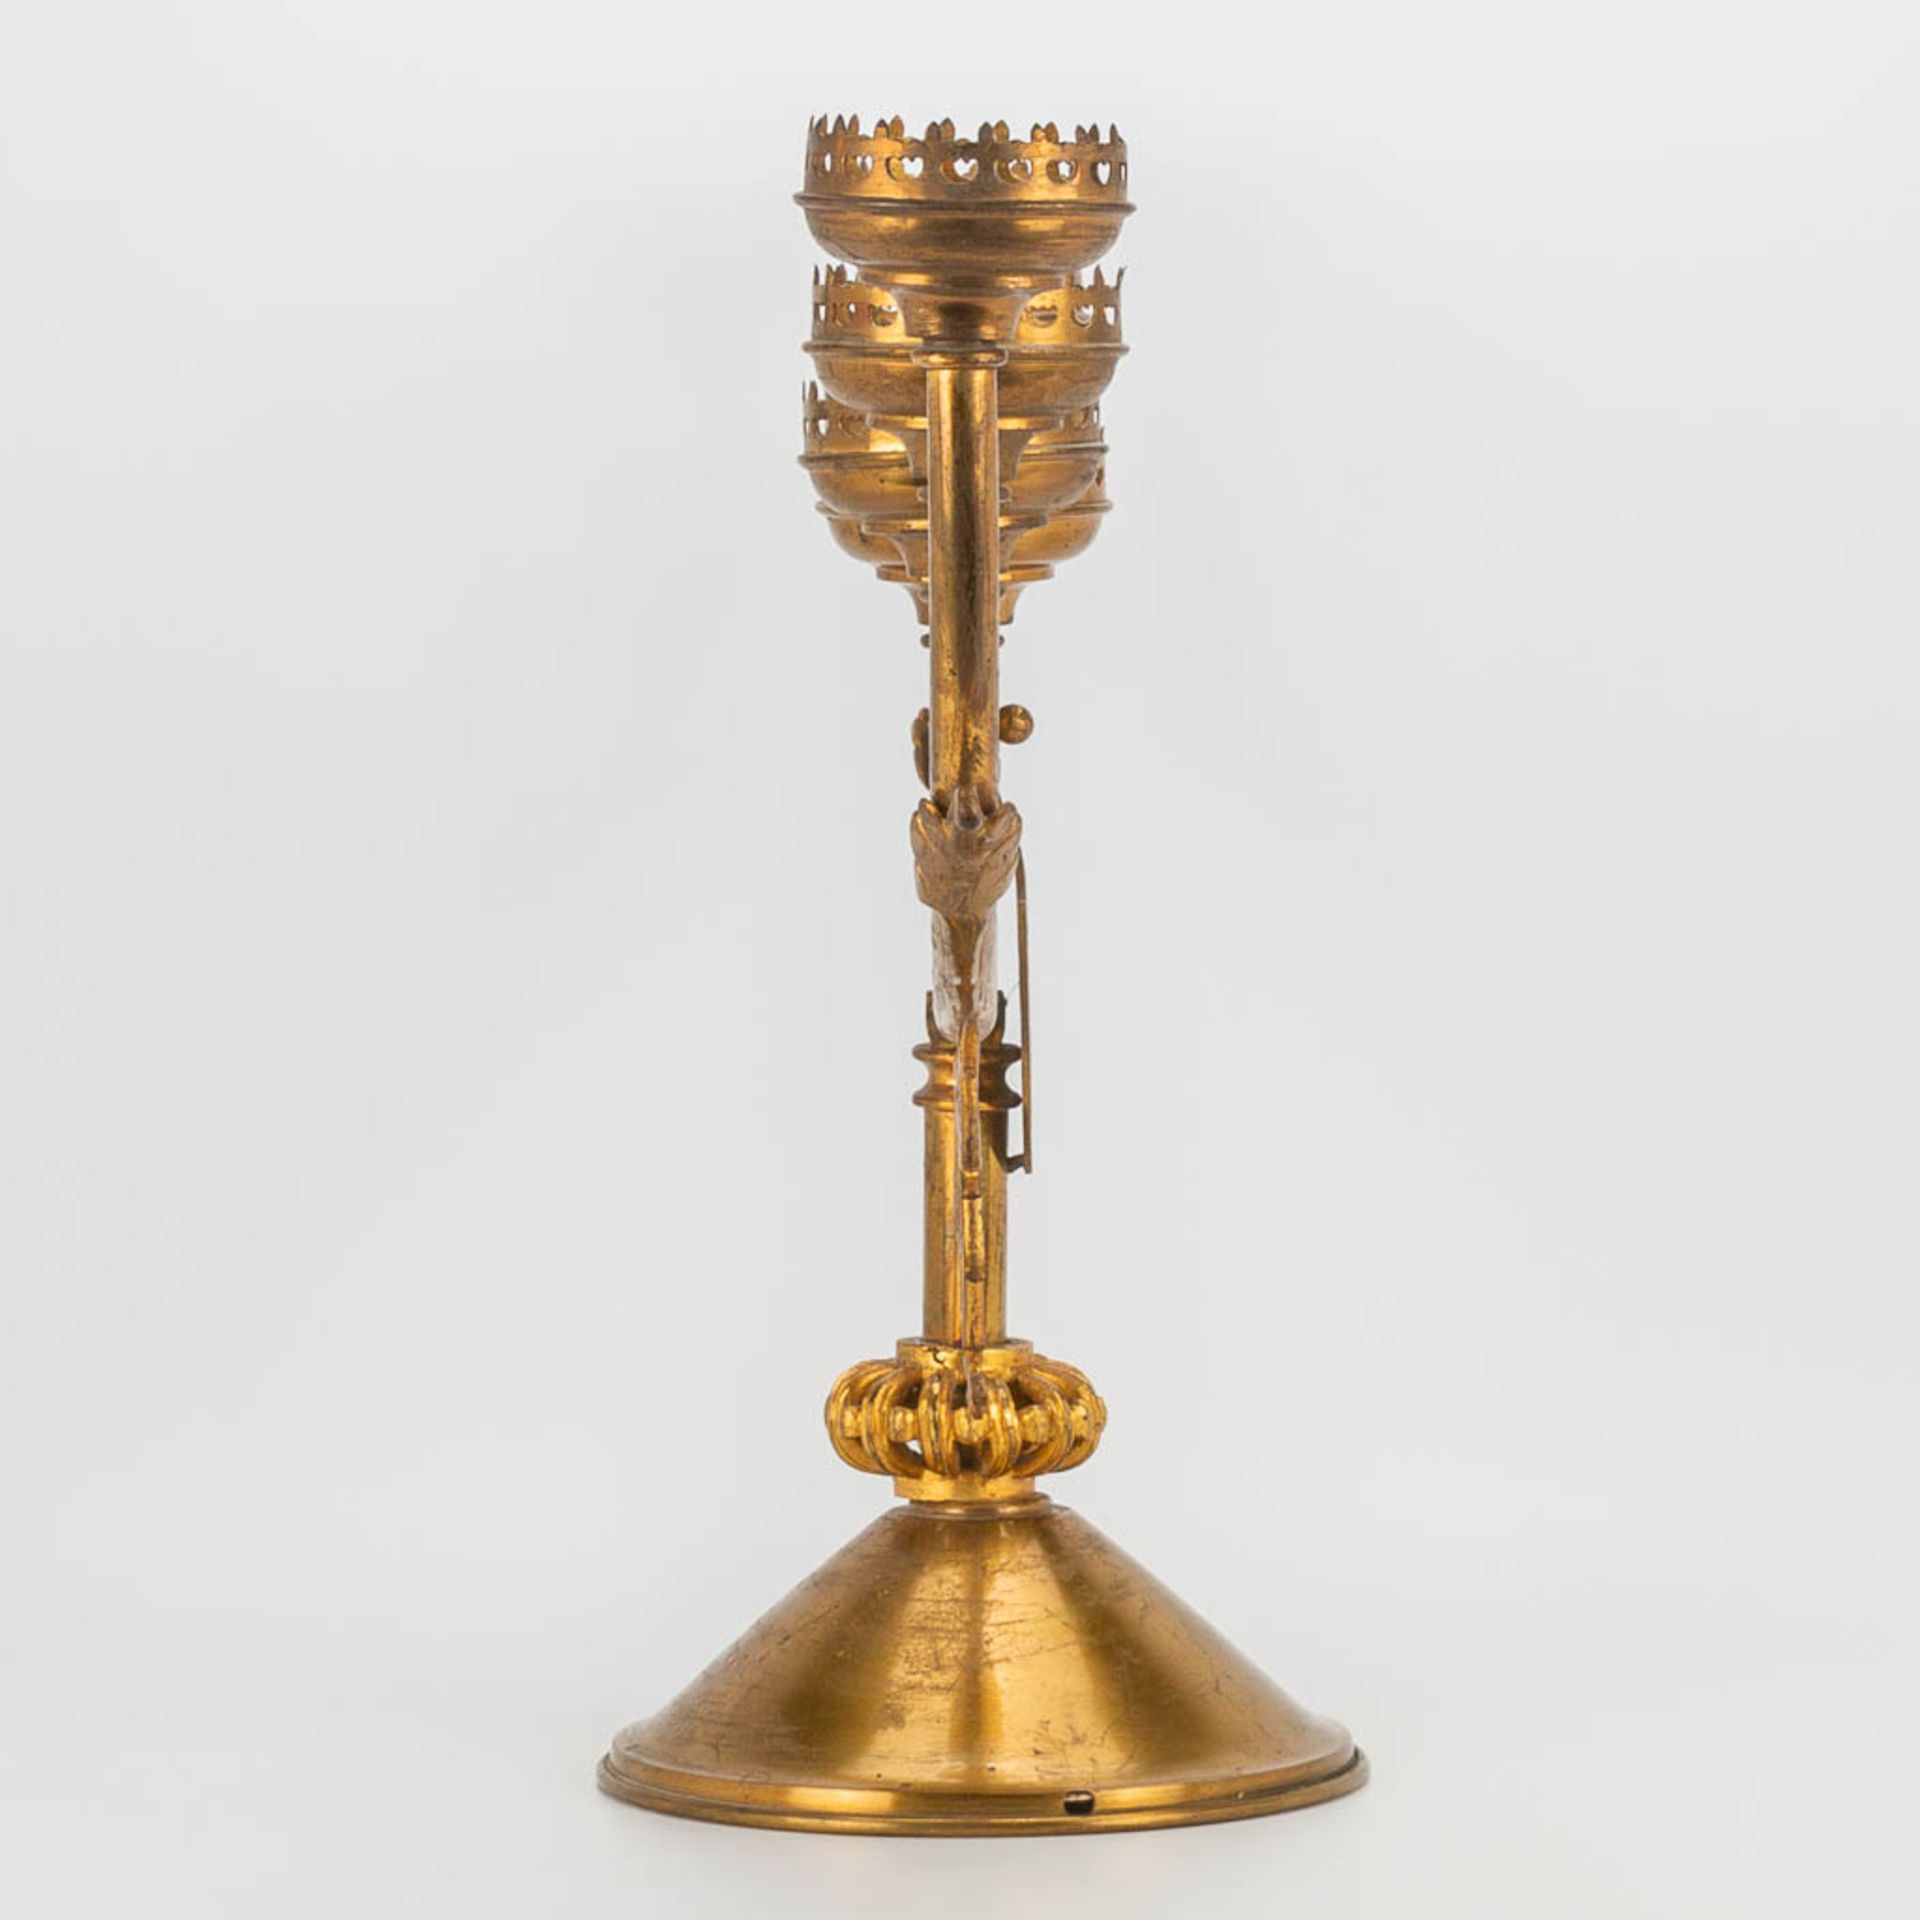 A church candlestick with 7 candle holders, Neogothic style. First half of the 20th century. - Image 2 of 19